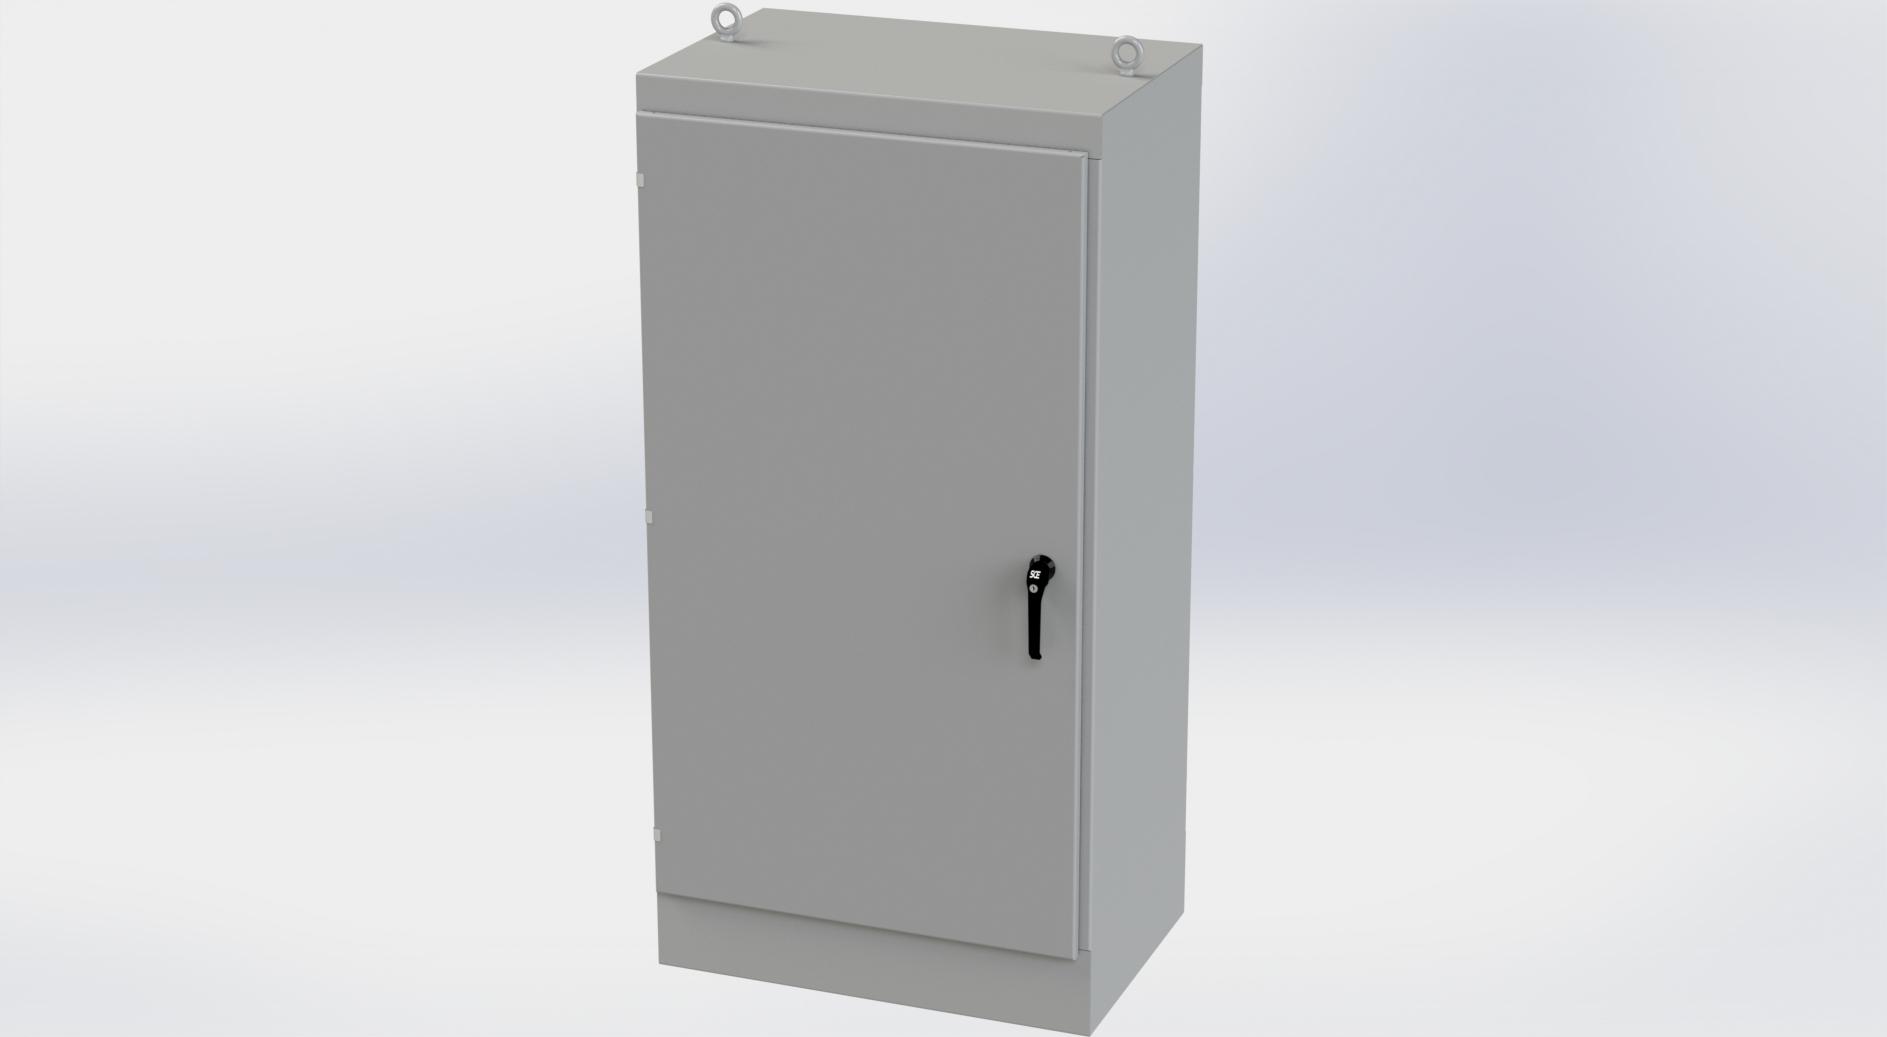 Saginaw Control SCE-723624FSDA FSDA Enclosure, Height:72.00", Width:36.00", Depth:24.00", ANSI-61 gray powder coat inside and out. Optional sub-panels are powder coated white.